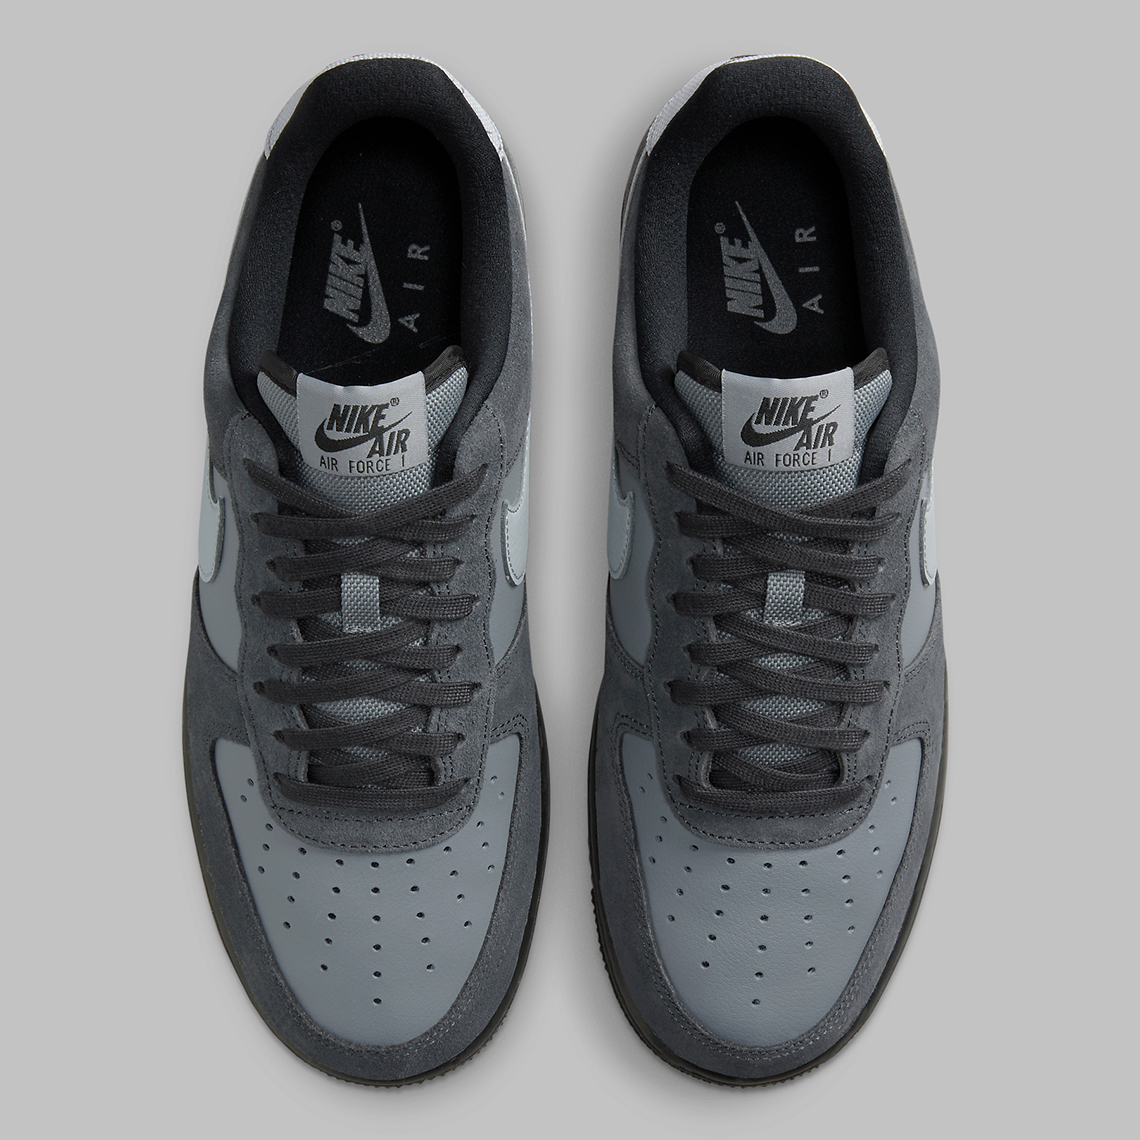 nike-air-force-1-low-wolf-grey-anthracite-CW7584-001-8.jpg